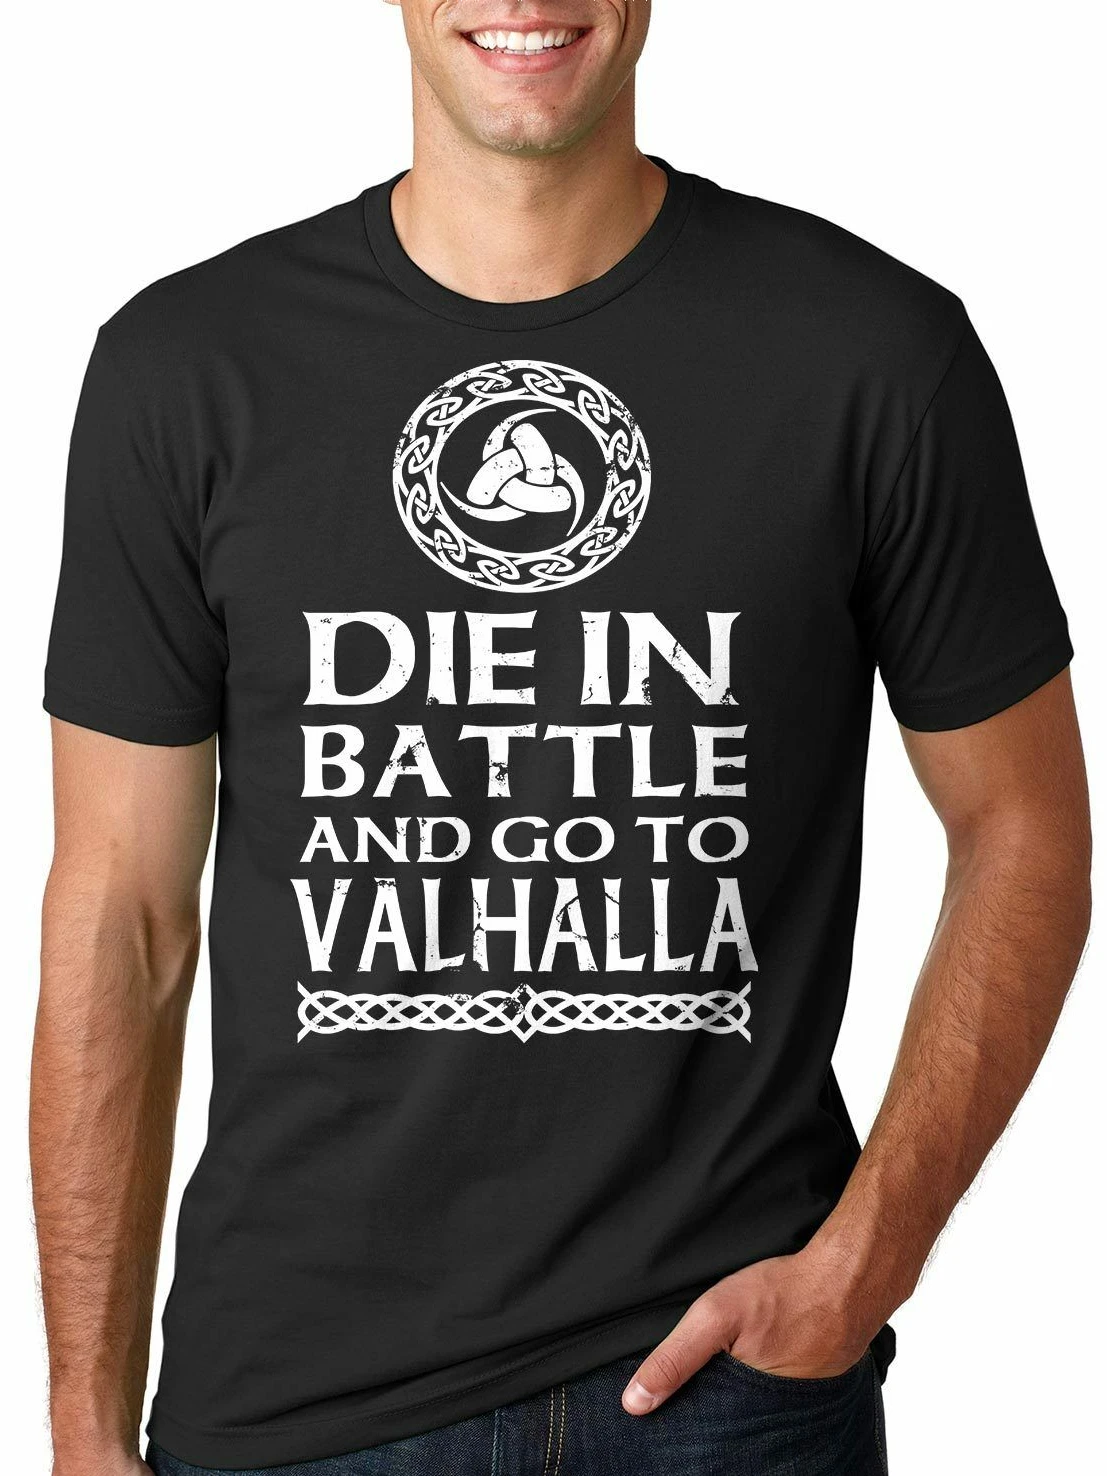 

Die In Battle and Go To Valhalla. Vikings Slogan Rune T Shirt. Short Sleeve 100% Cotton Casual T-shirts Loose Top Size S-3XL